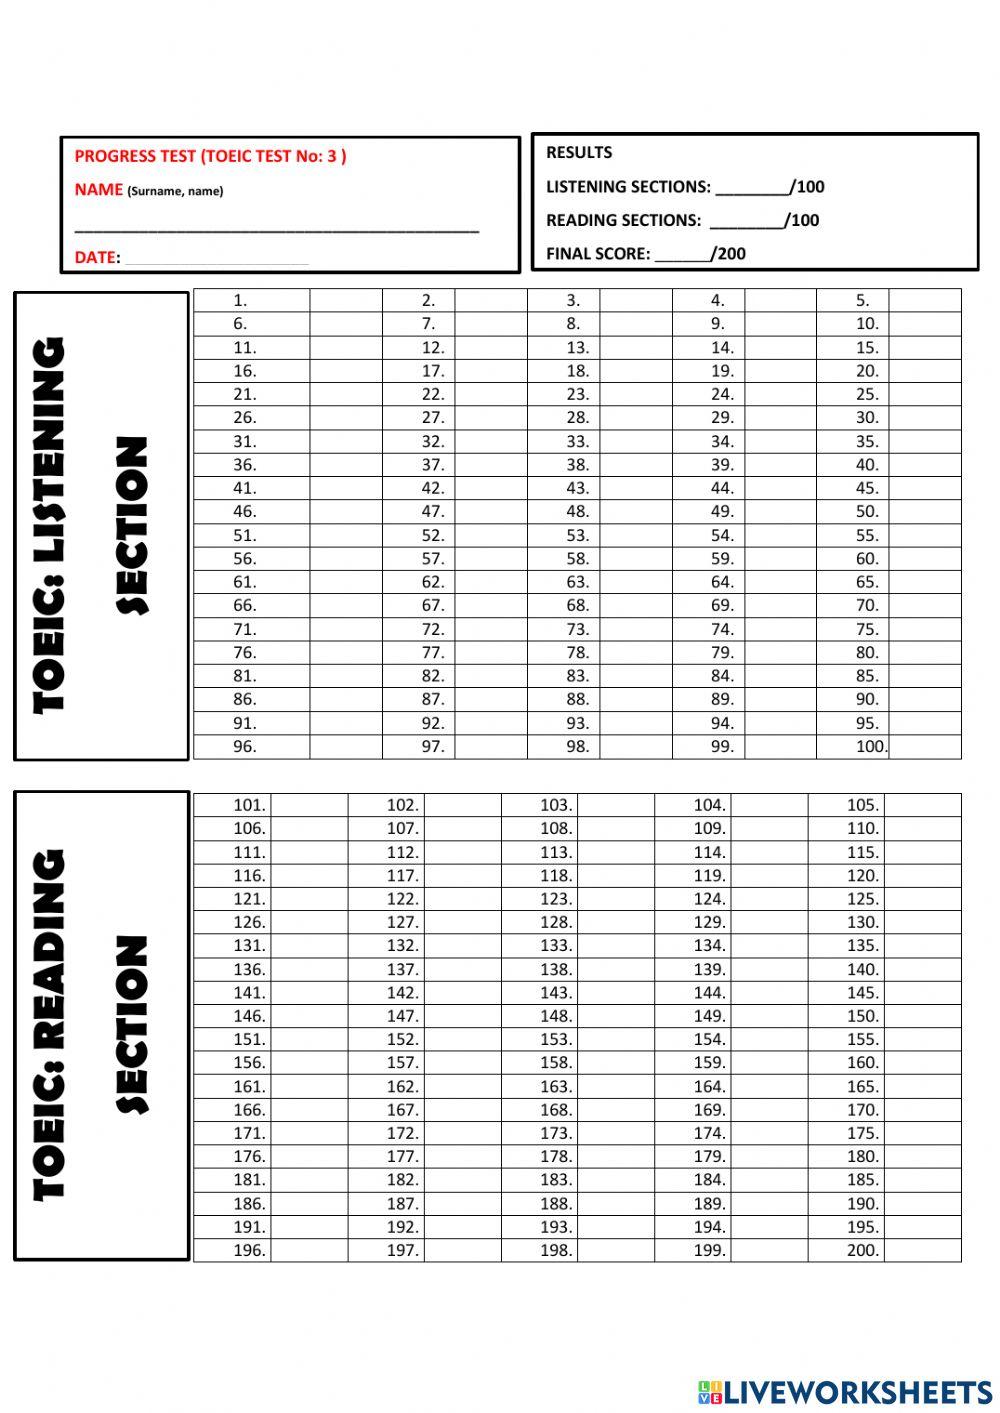 ANSER SHEET: Toeic list and reading